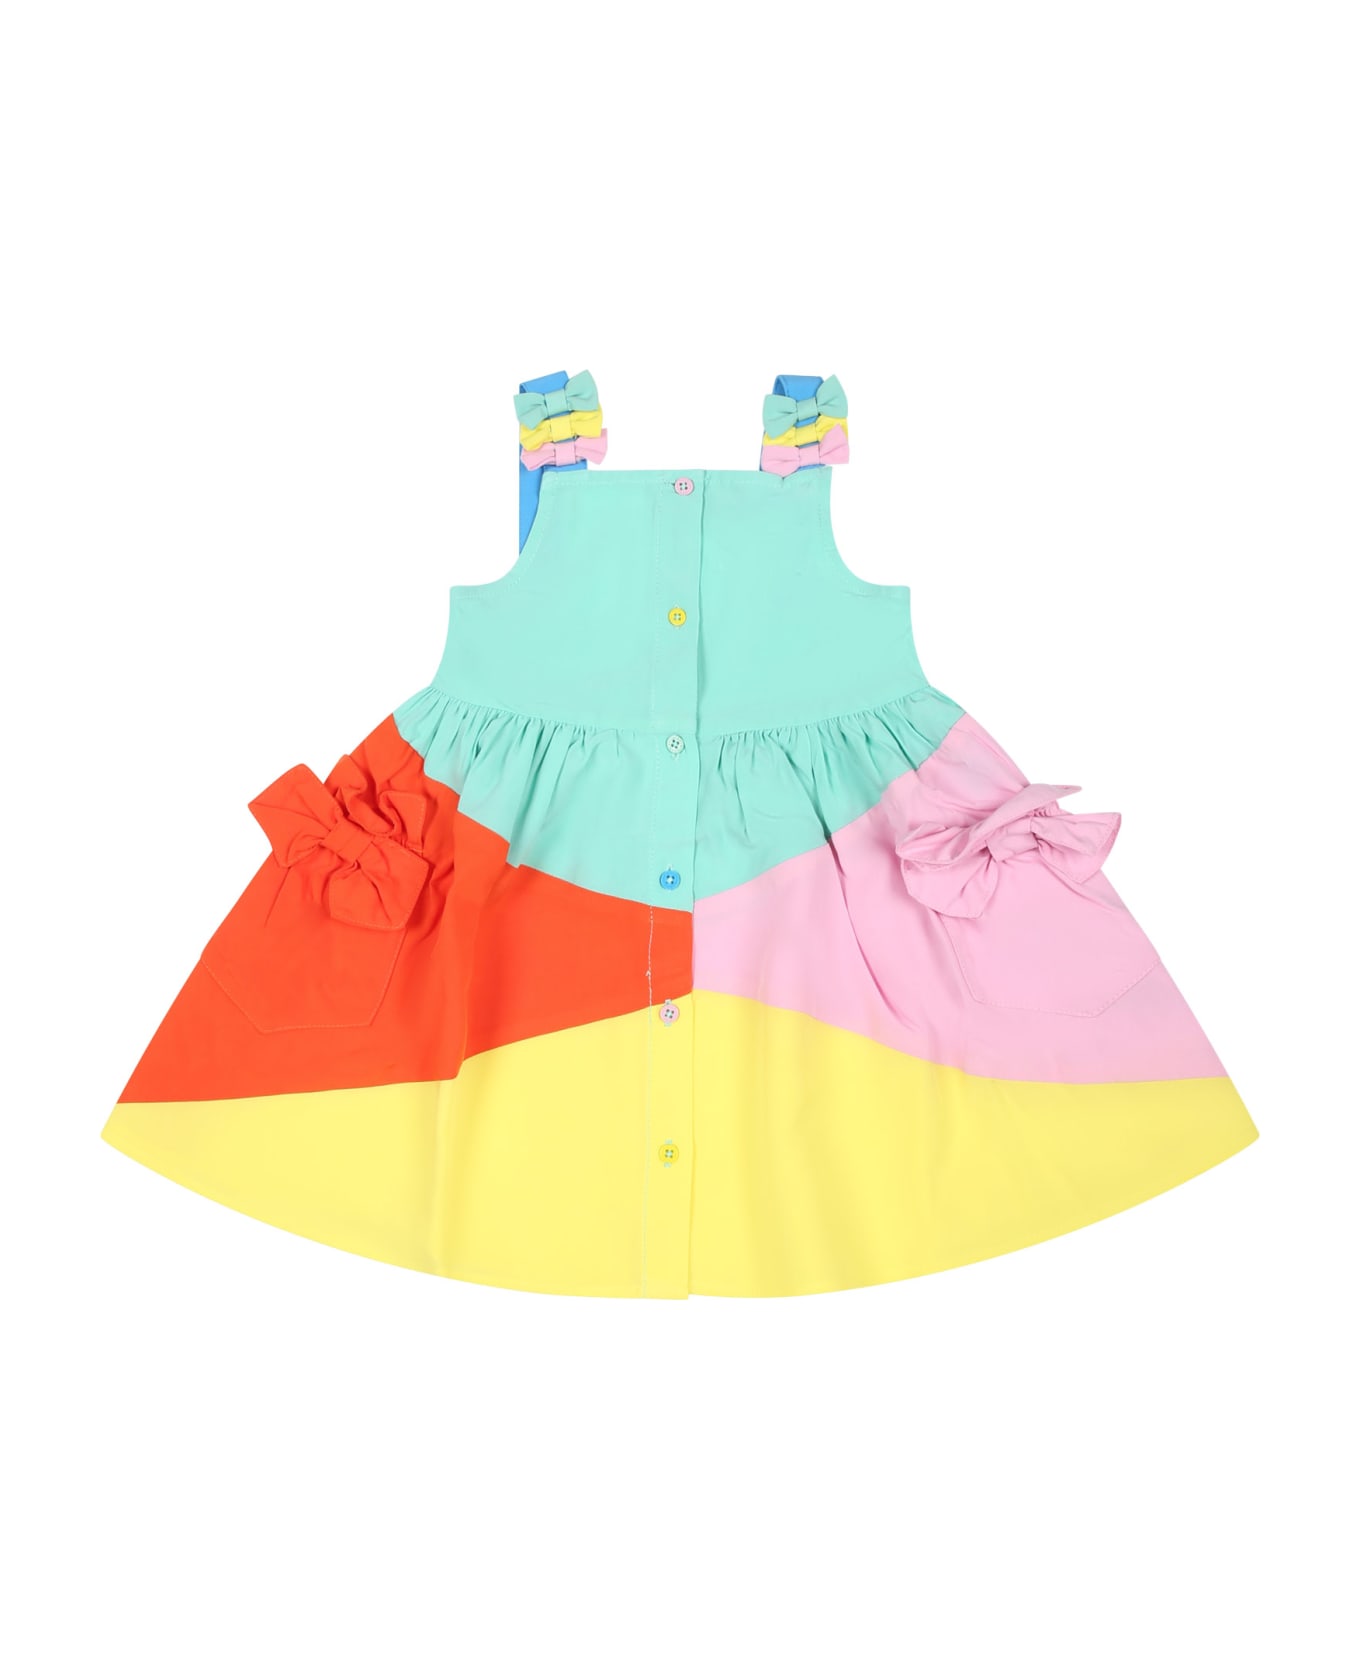 Stella McCartney Kids Green Dress For Baby Girl With Bows - Multicolor